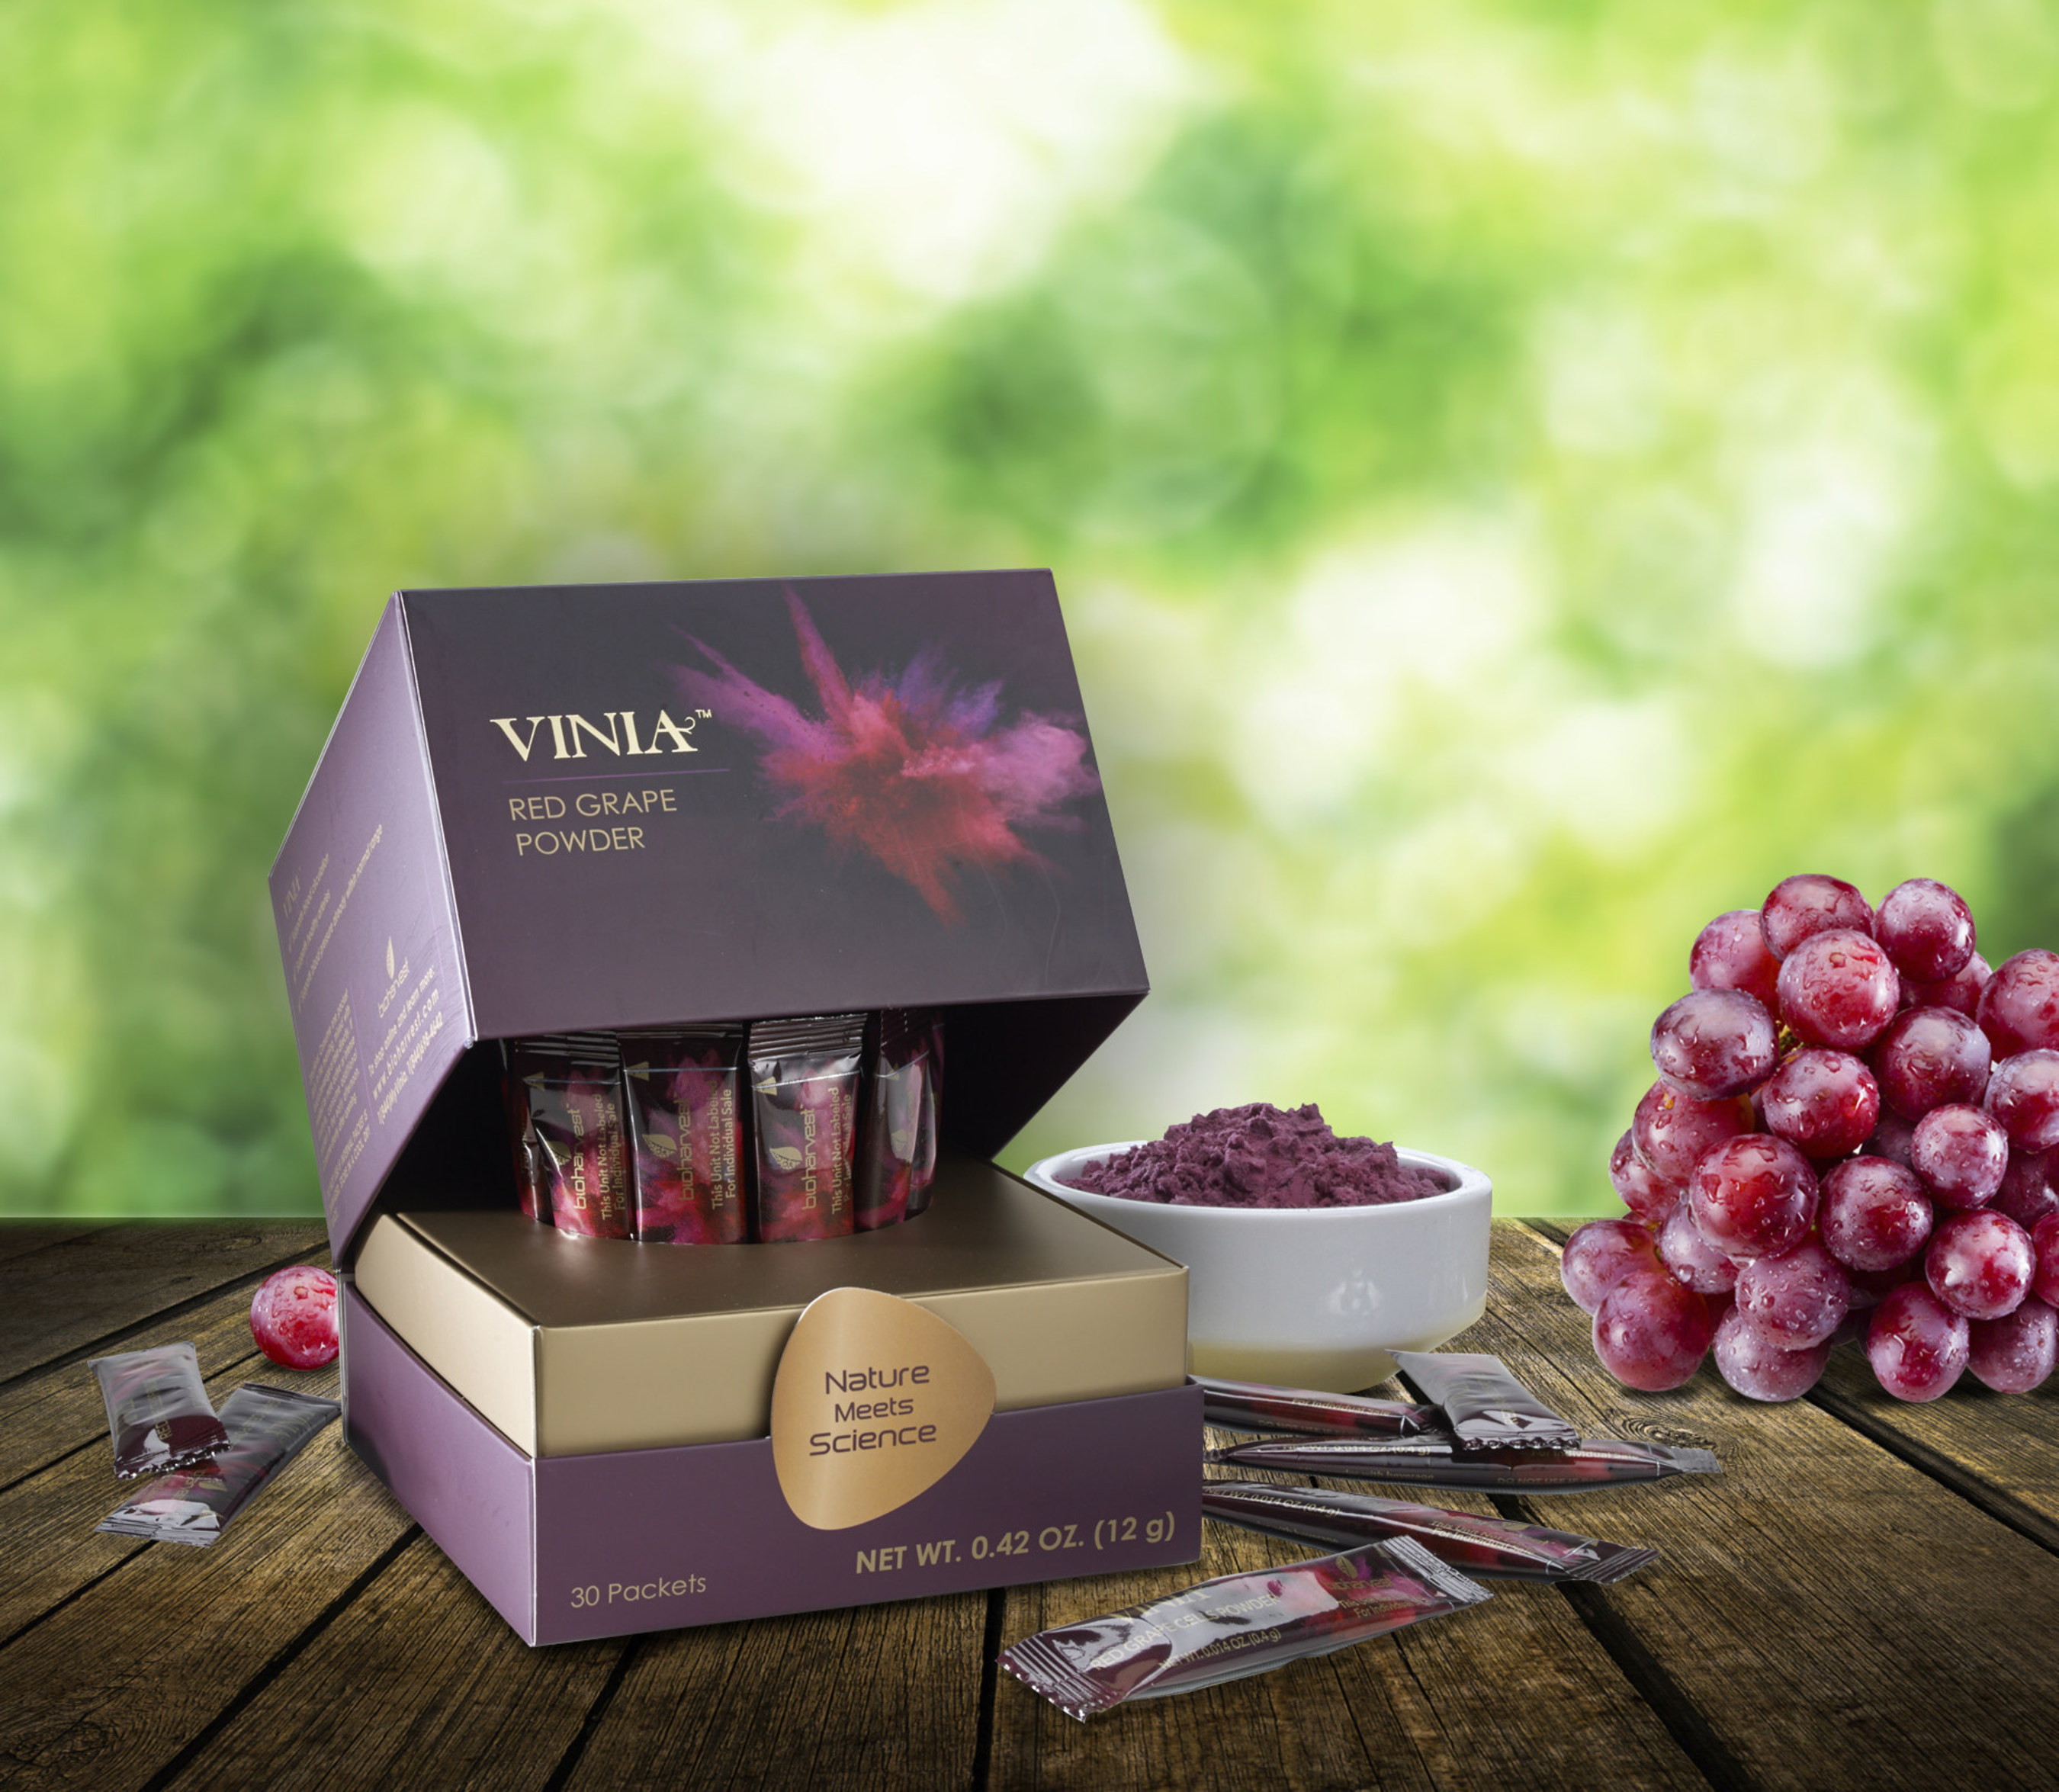 BIOHARVEST LAUNCHES VINIA(TM) - REVOLUTIONARY FIRST-EVER BIOFOOD